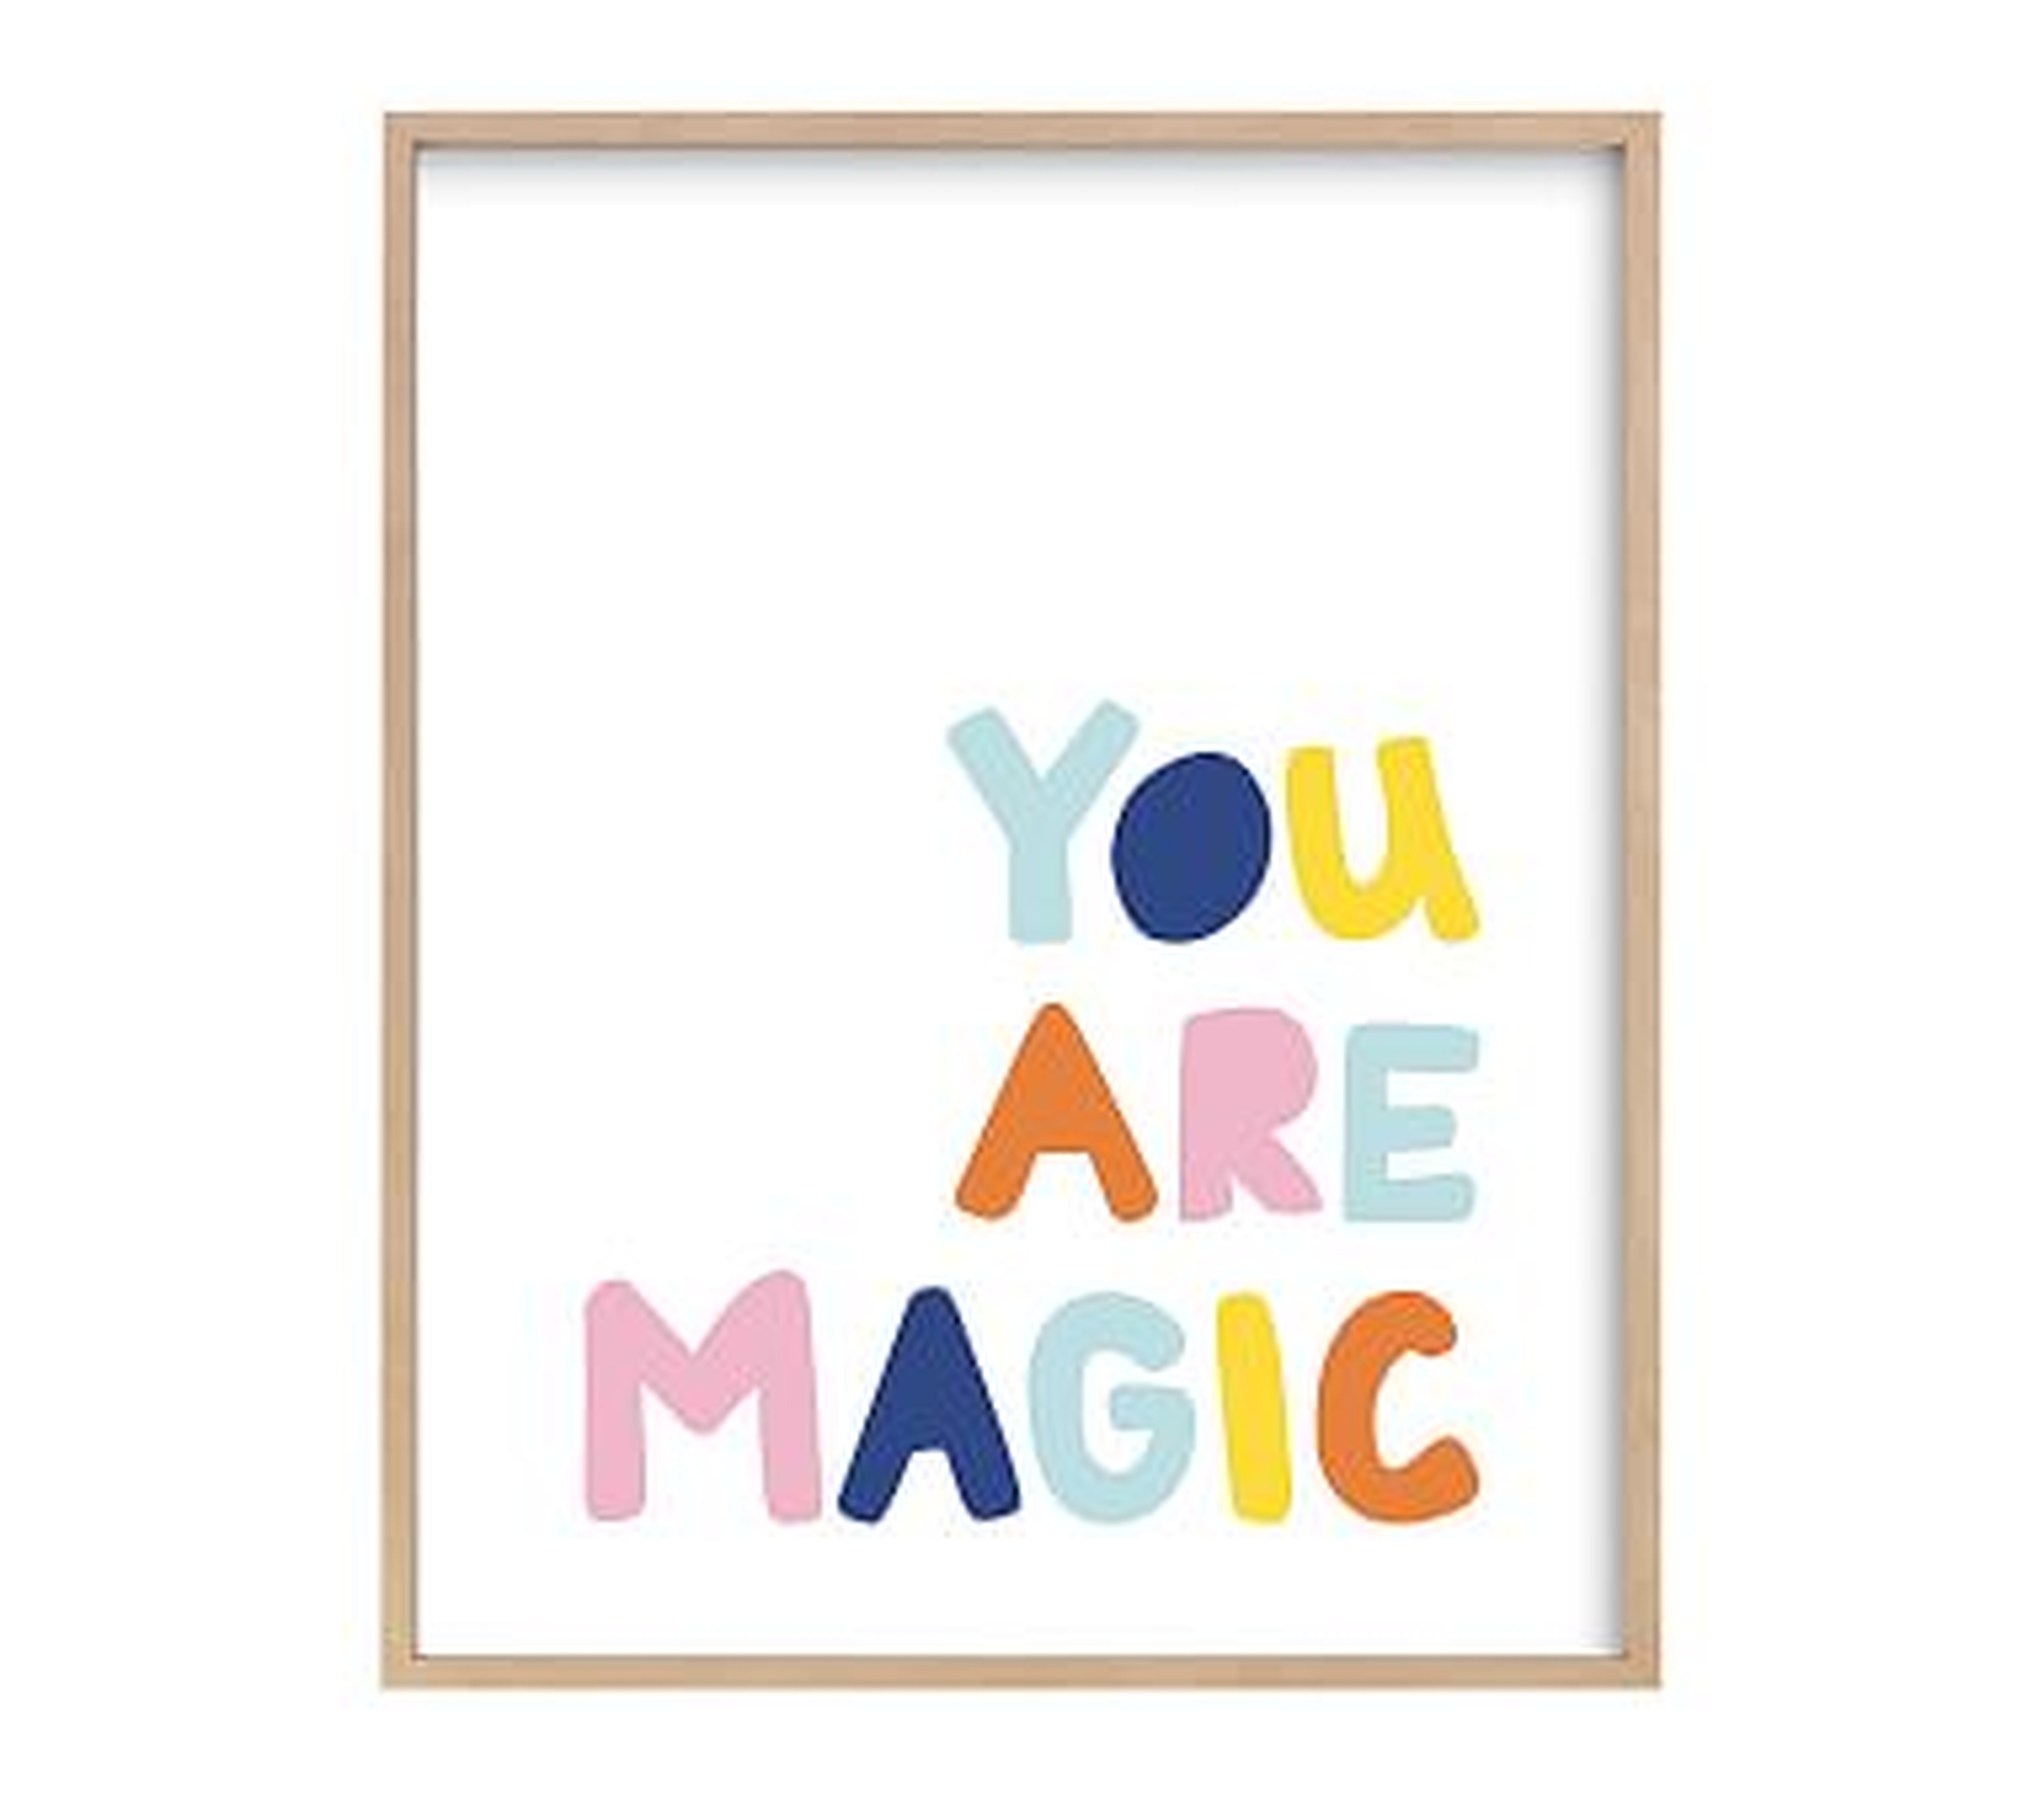 west elm x pbk You Are Magic Wall Art by Minted(R), Natural, 16x20 - Pottery Barn Kids